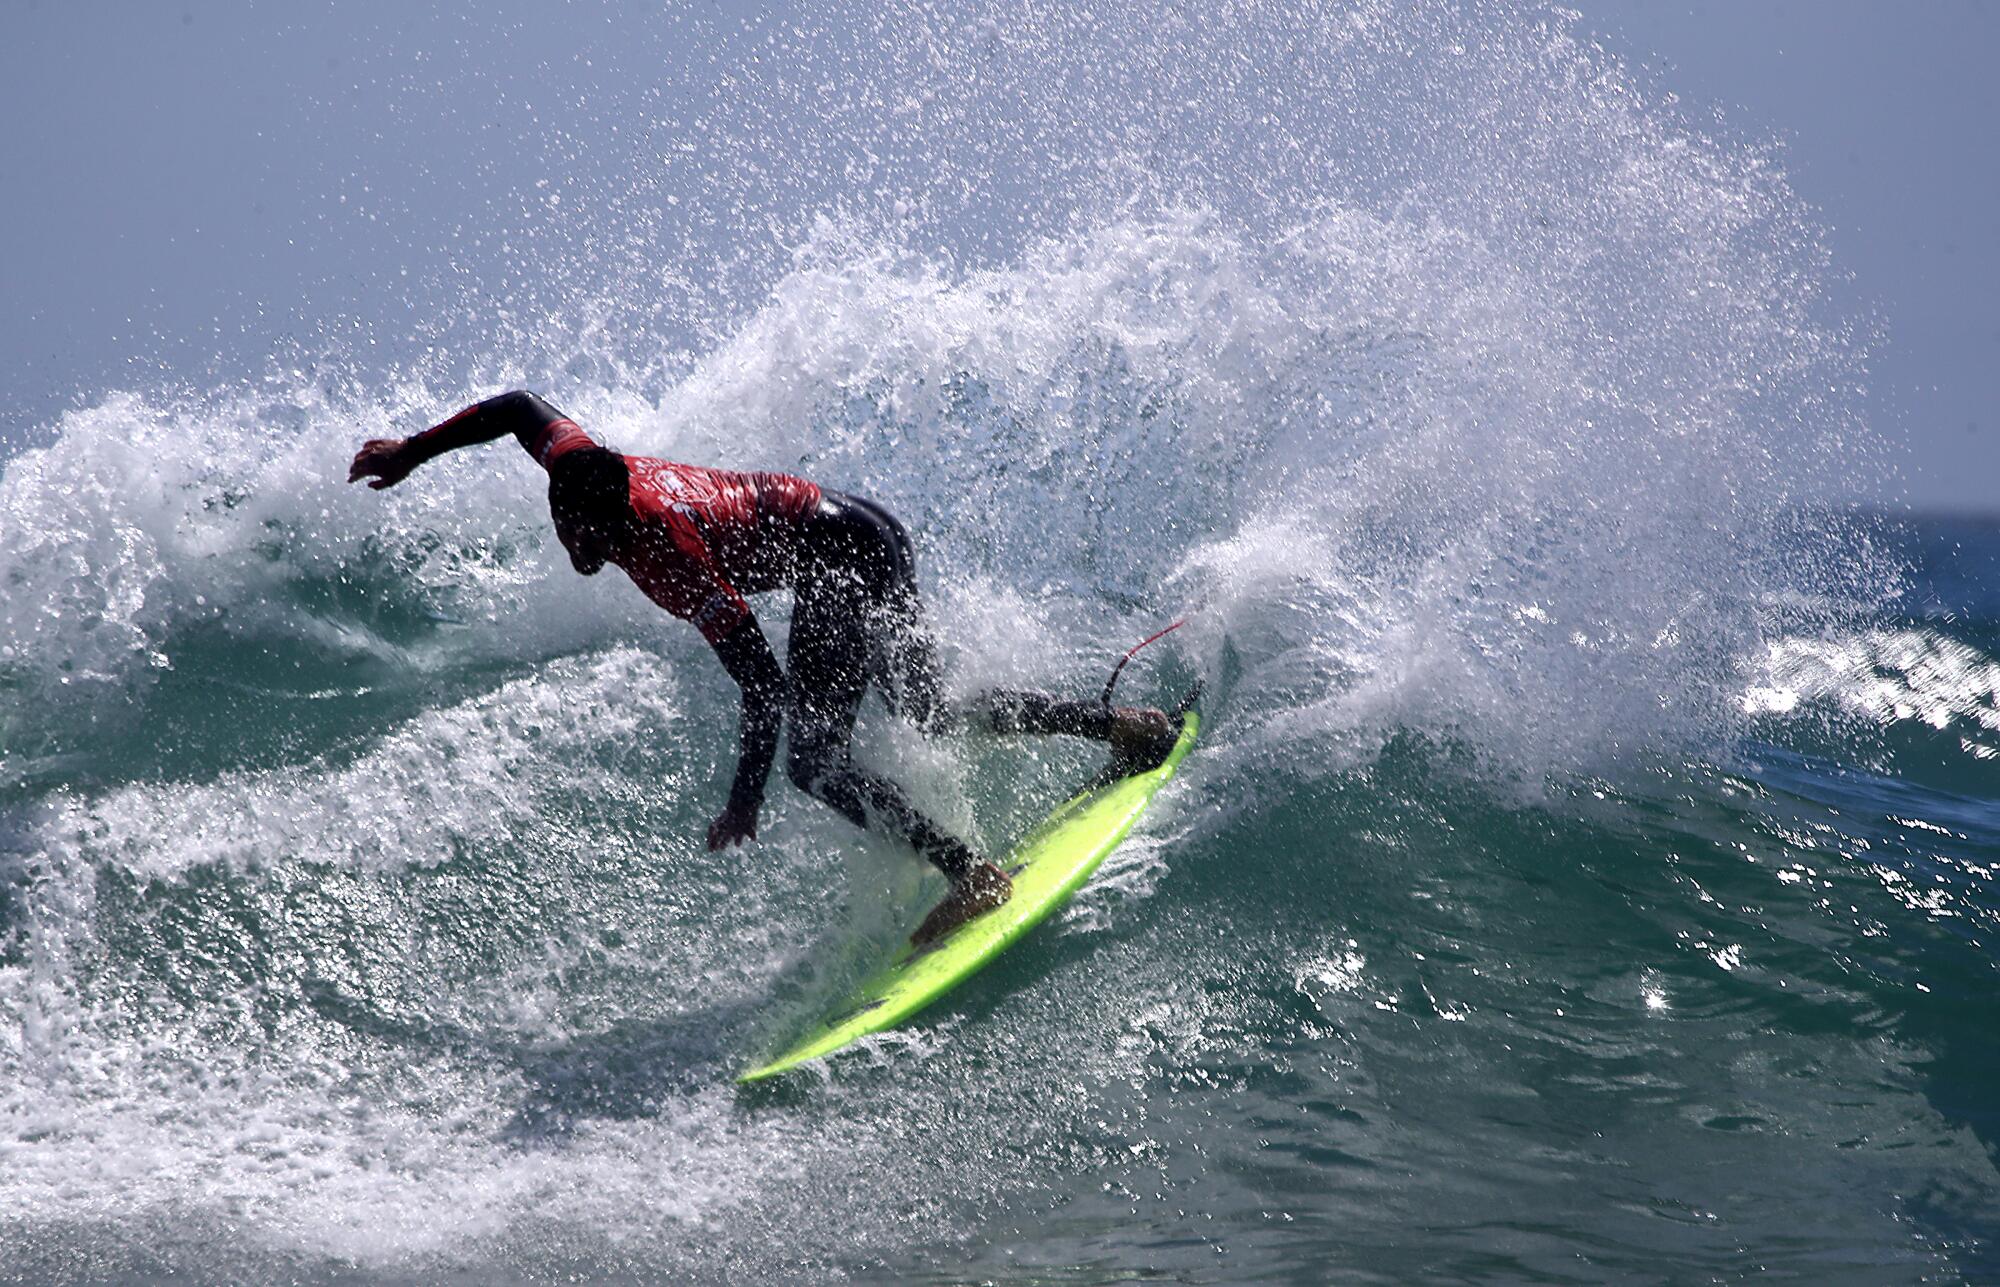 Ezekiel Lau competes in the finals of the U.S. Open of Surfing.